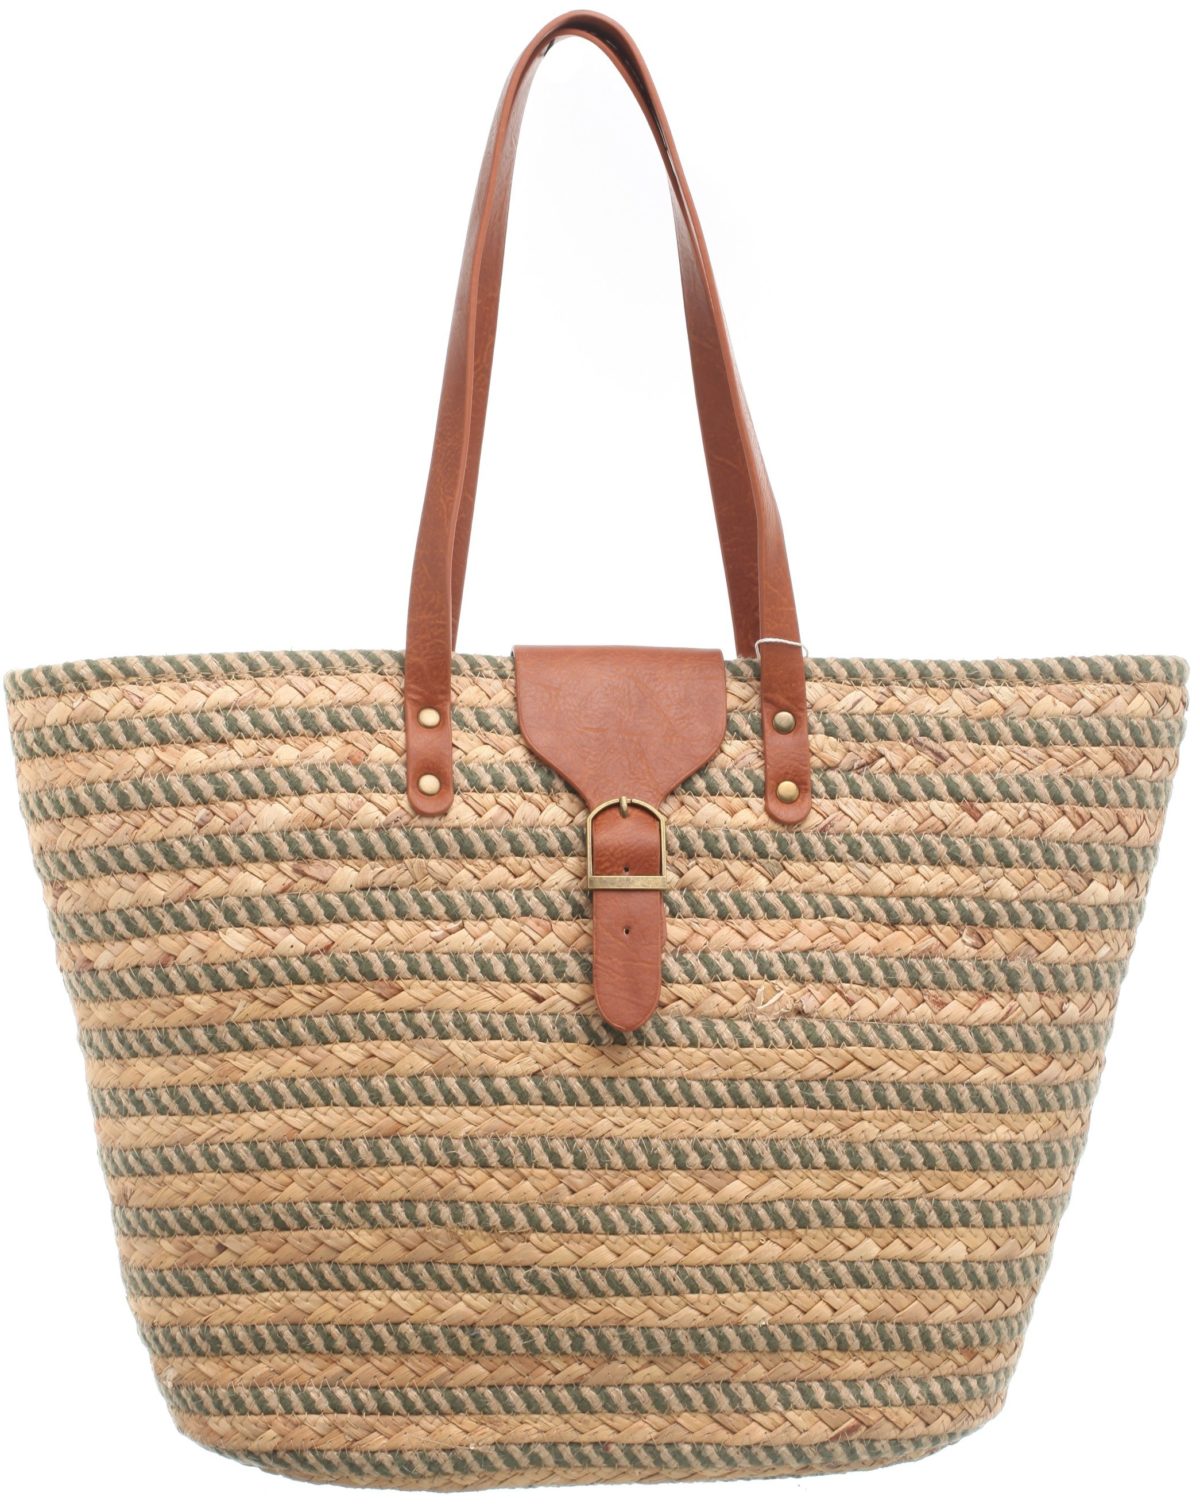 Large basket shopper with zip. brown leather handels and strap